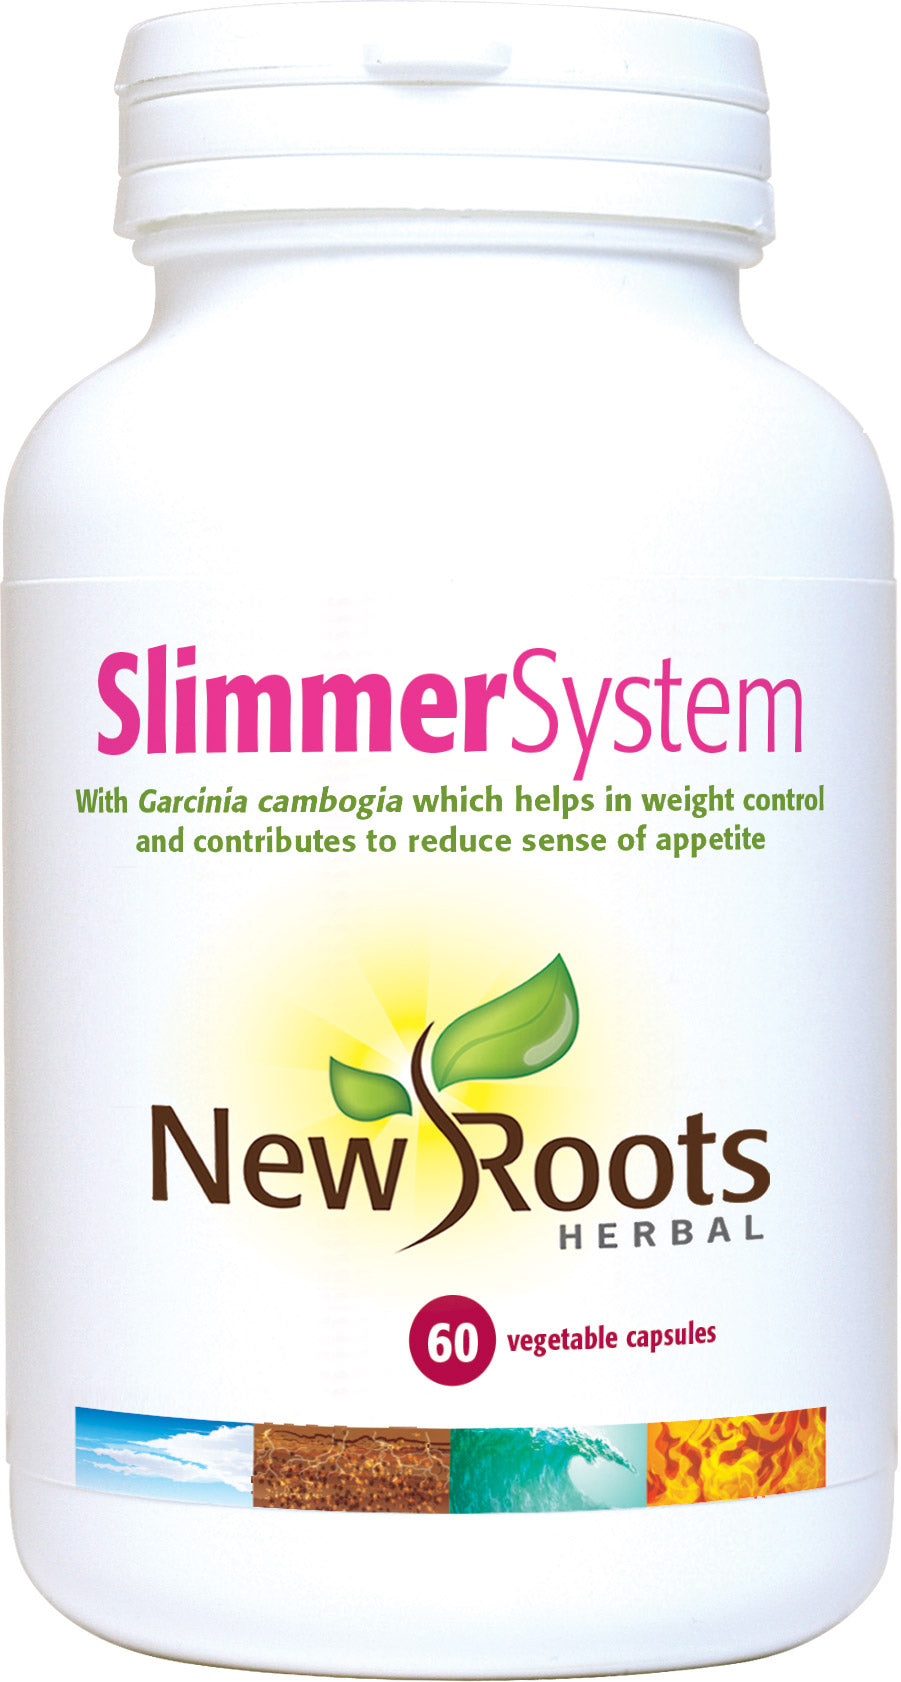 New Roots Herbal Slimmer System 60's